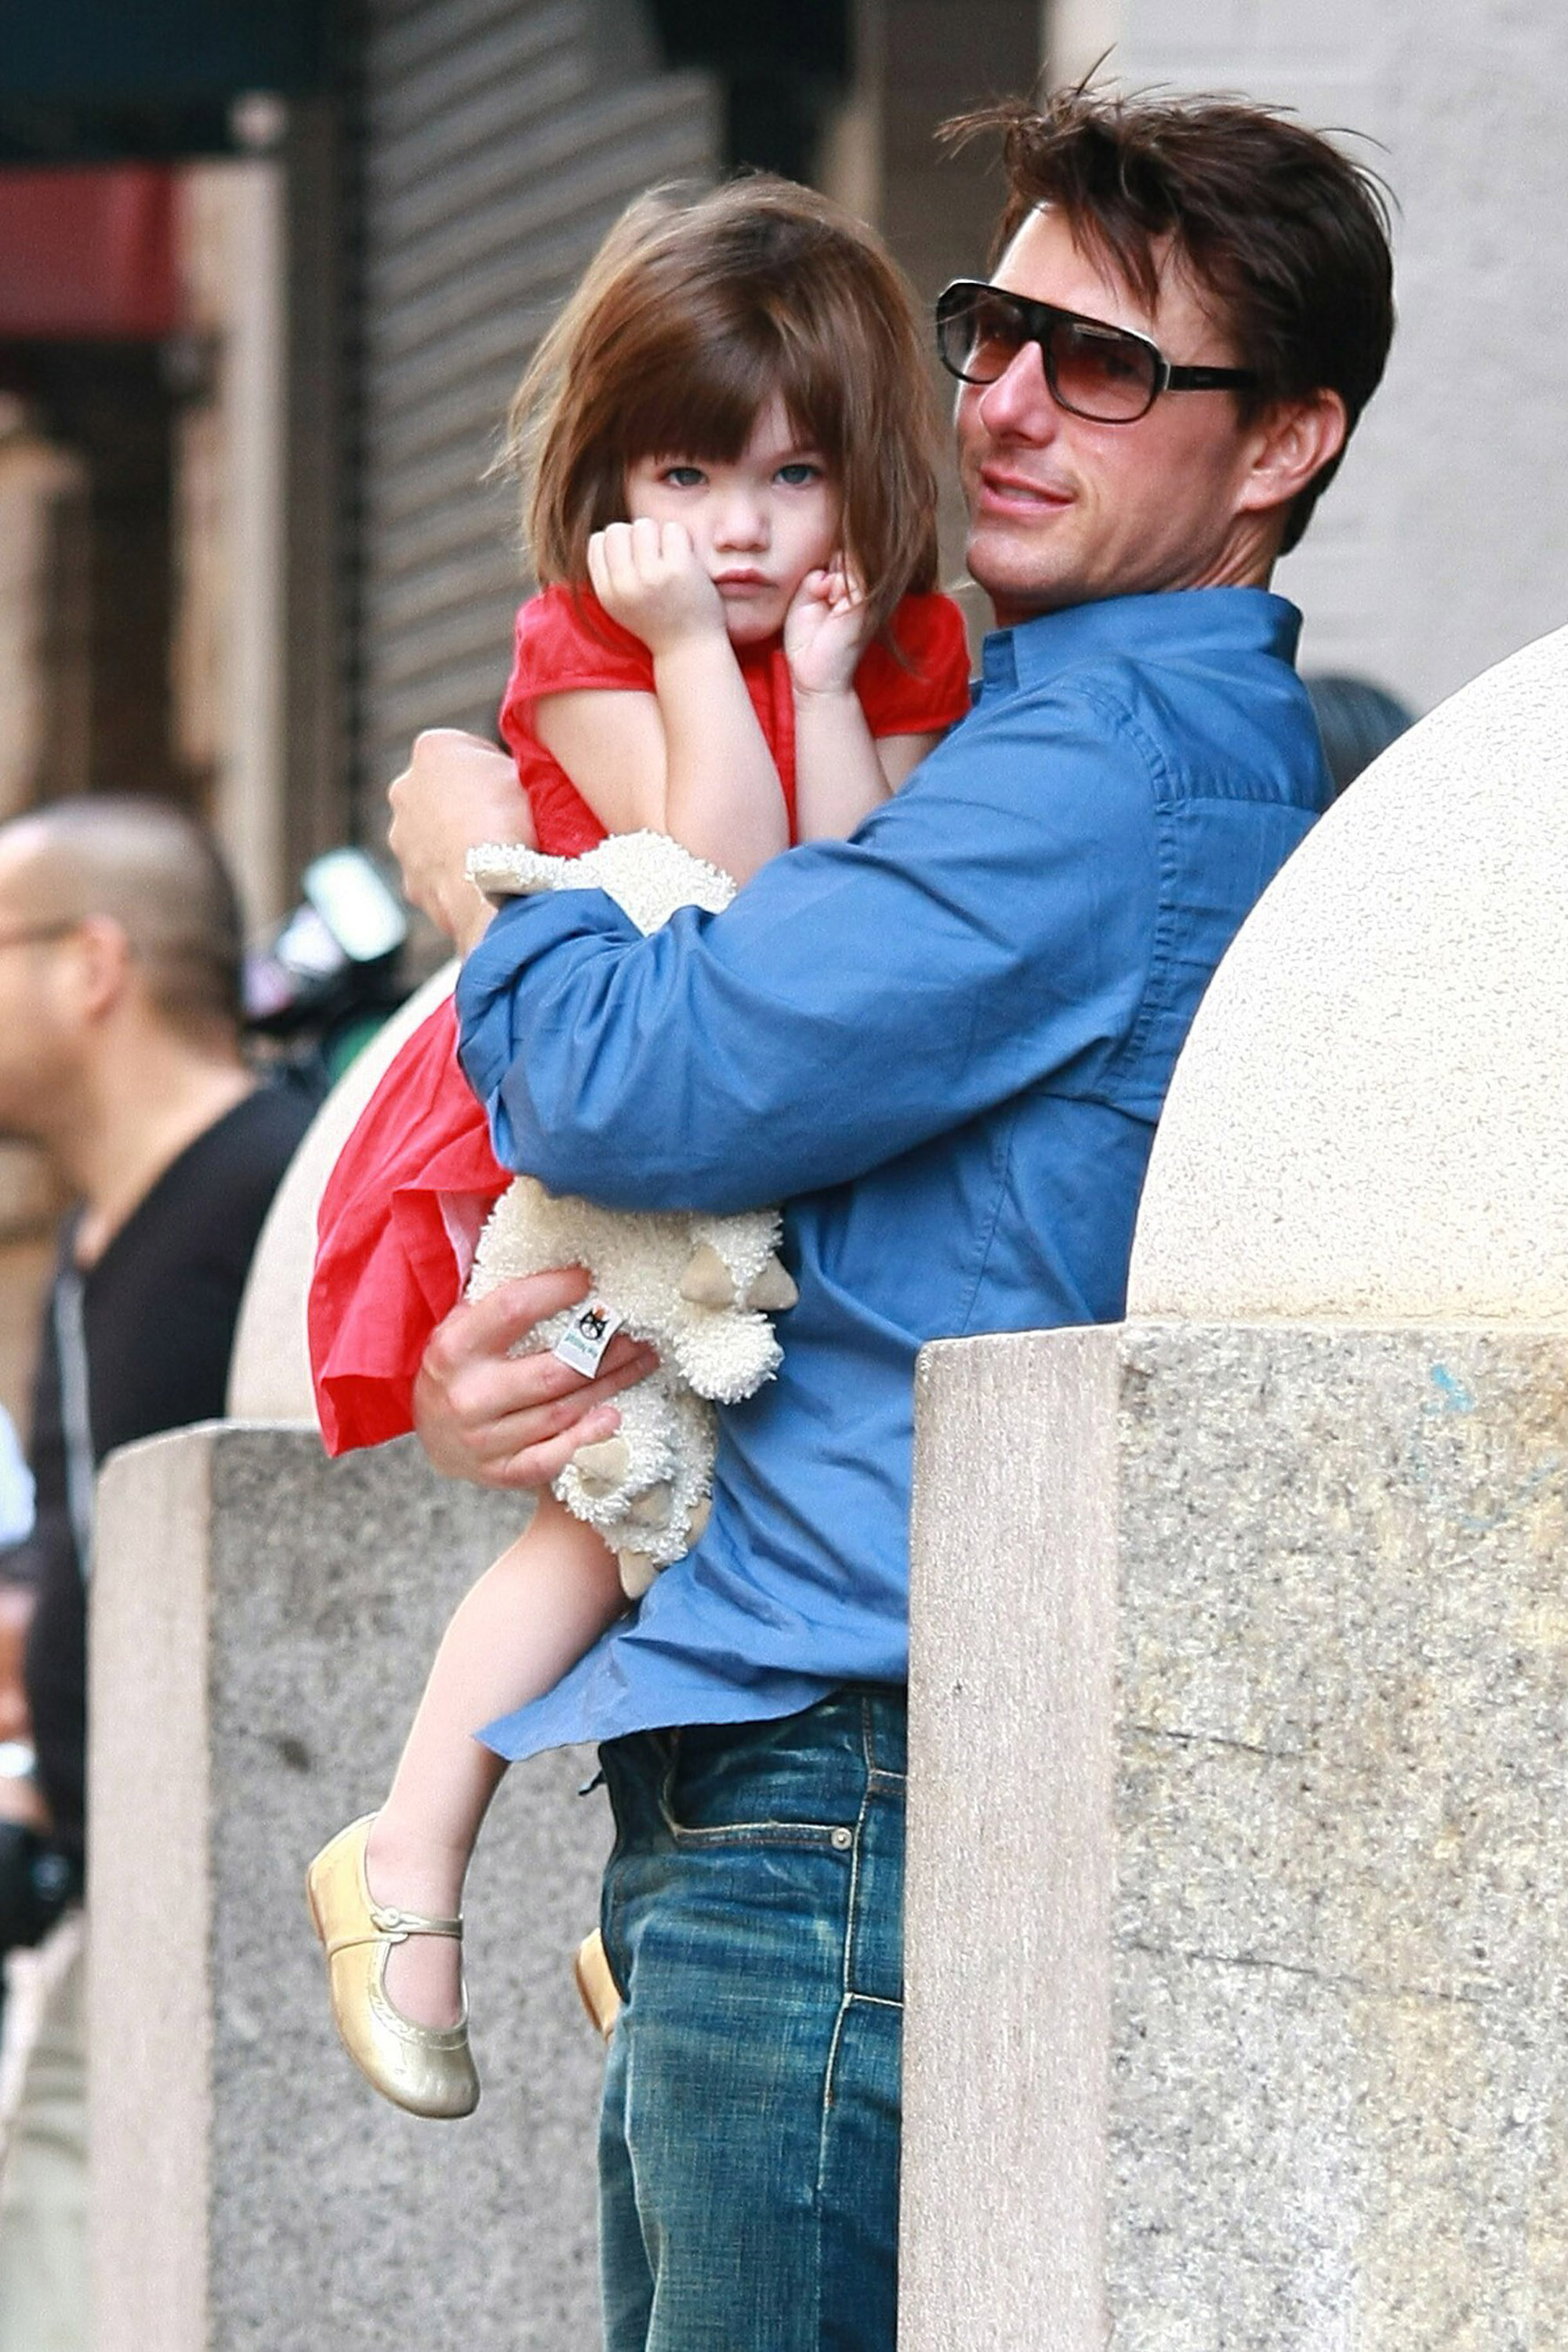 tom cruise ever see his daughter